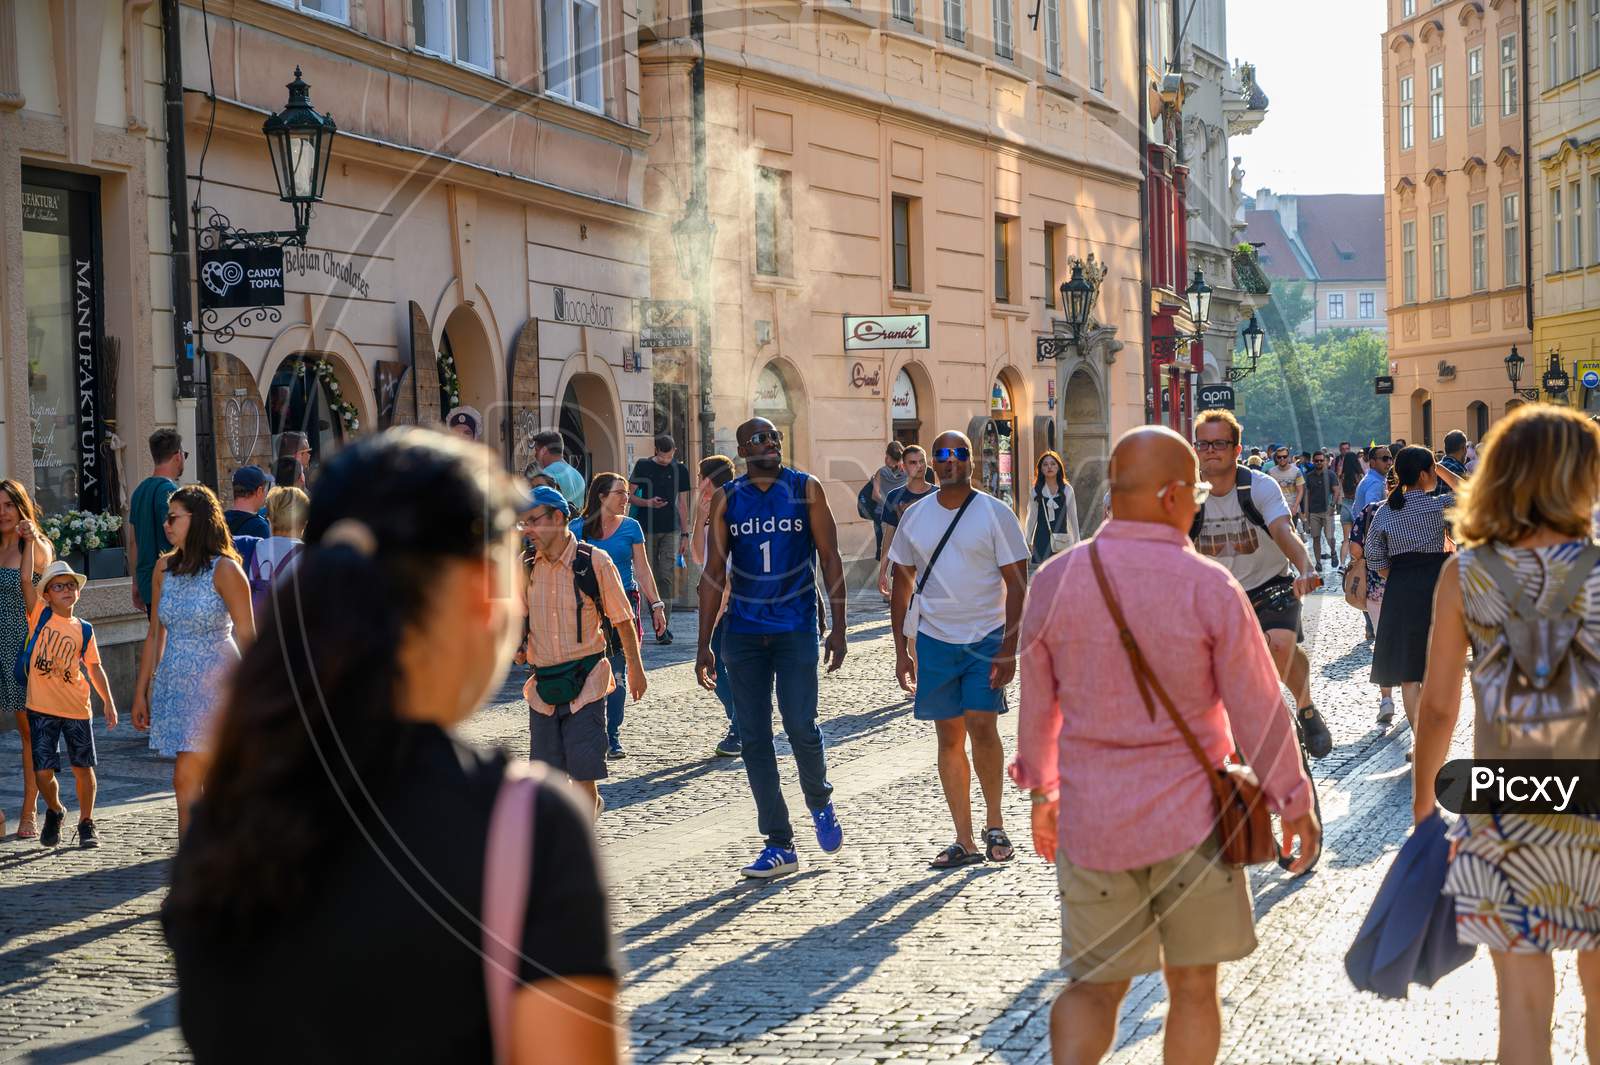 Tourists Exploring The Ancient Cobbled Streets In Old Town District Of Prague, Czech Republic In The Golden Light Of Early Evening